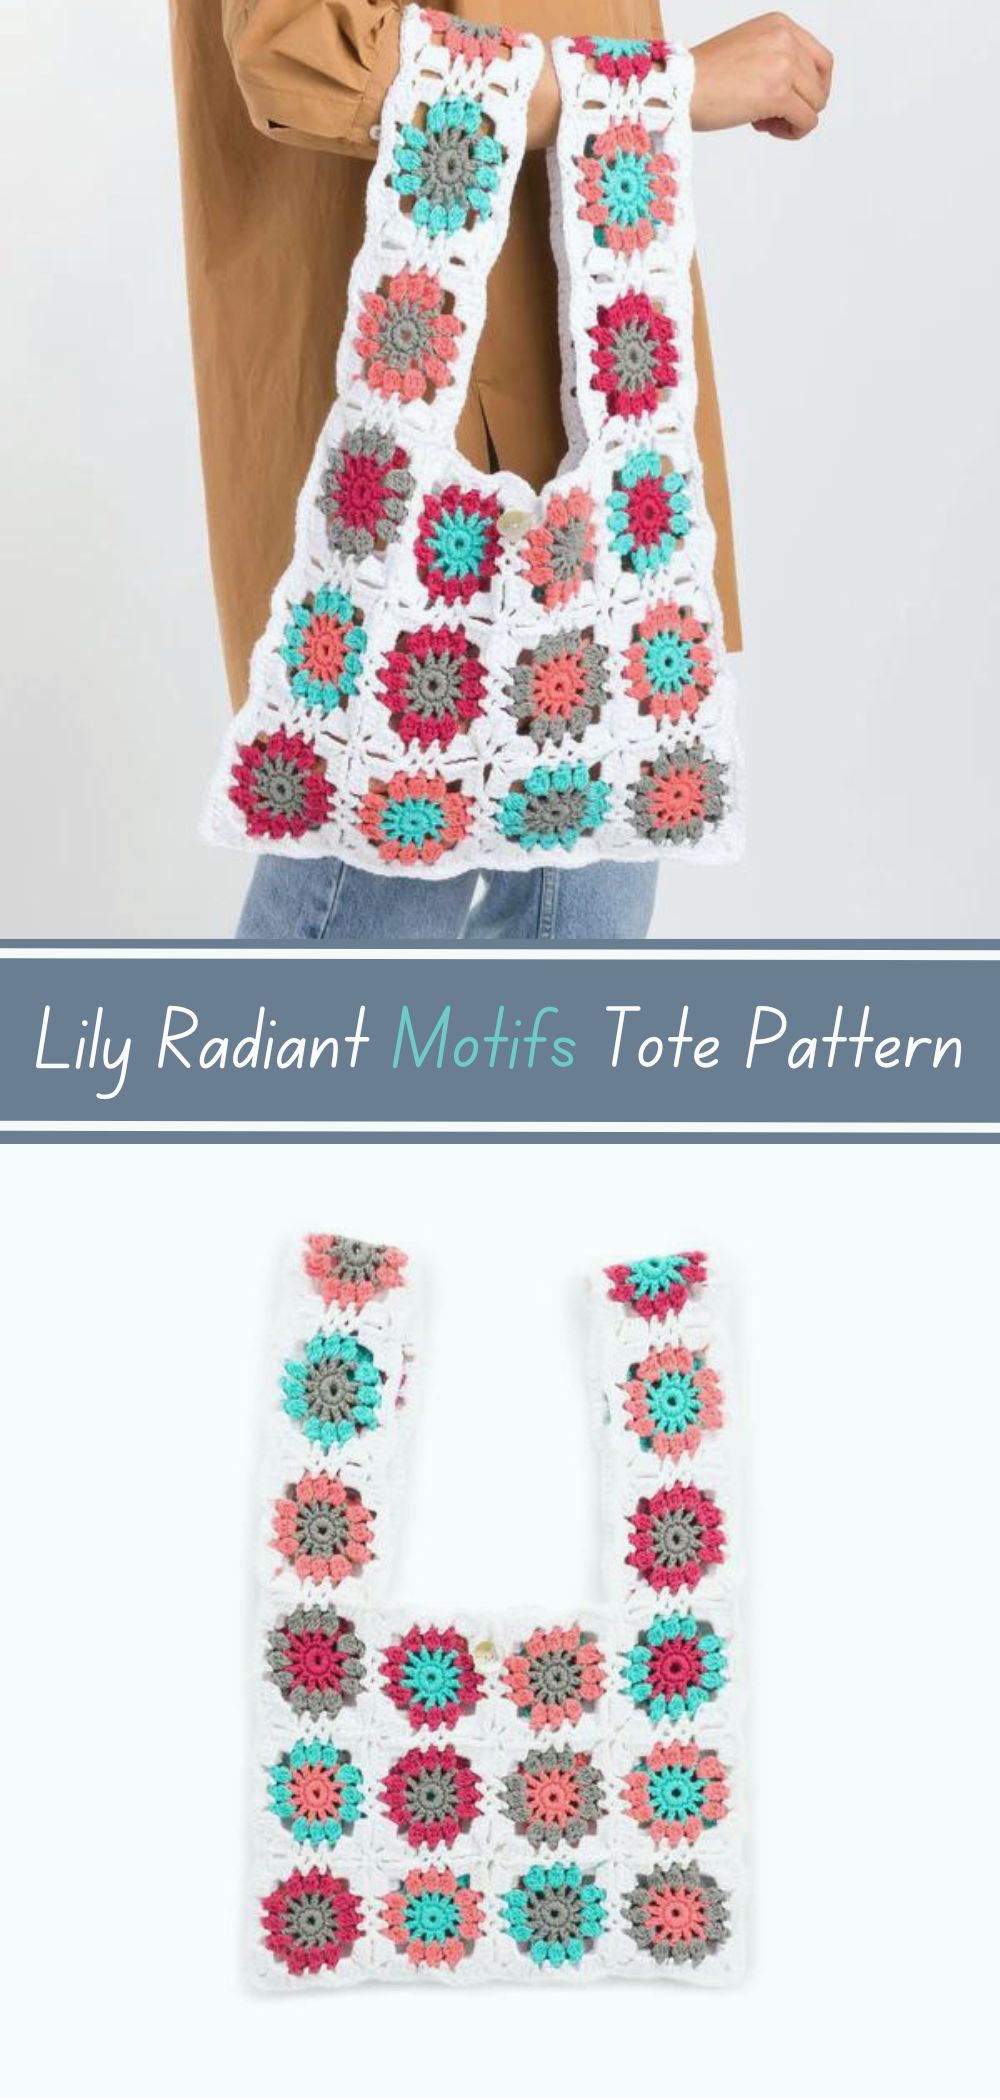 Lily Radiant Motifs Tote Crochet Pattern - Create a stylish tote bag adorned with radiant lily motifs with this crochet pattern